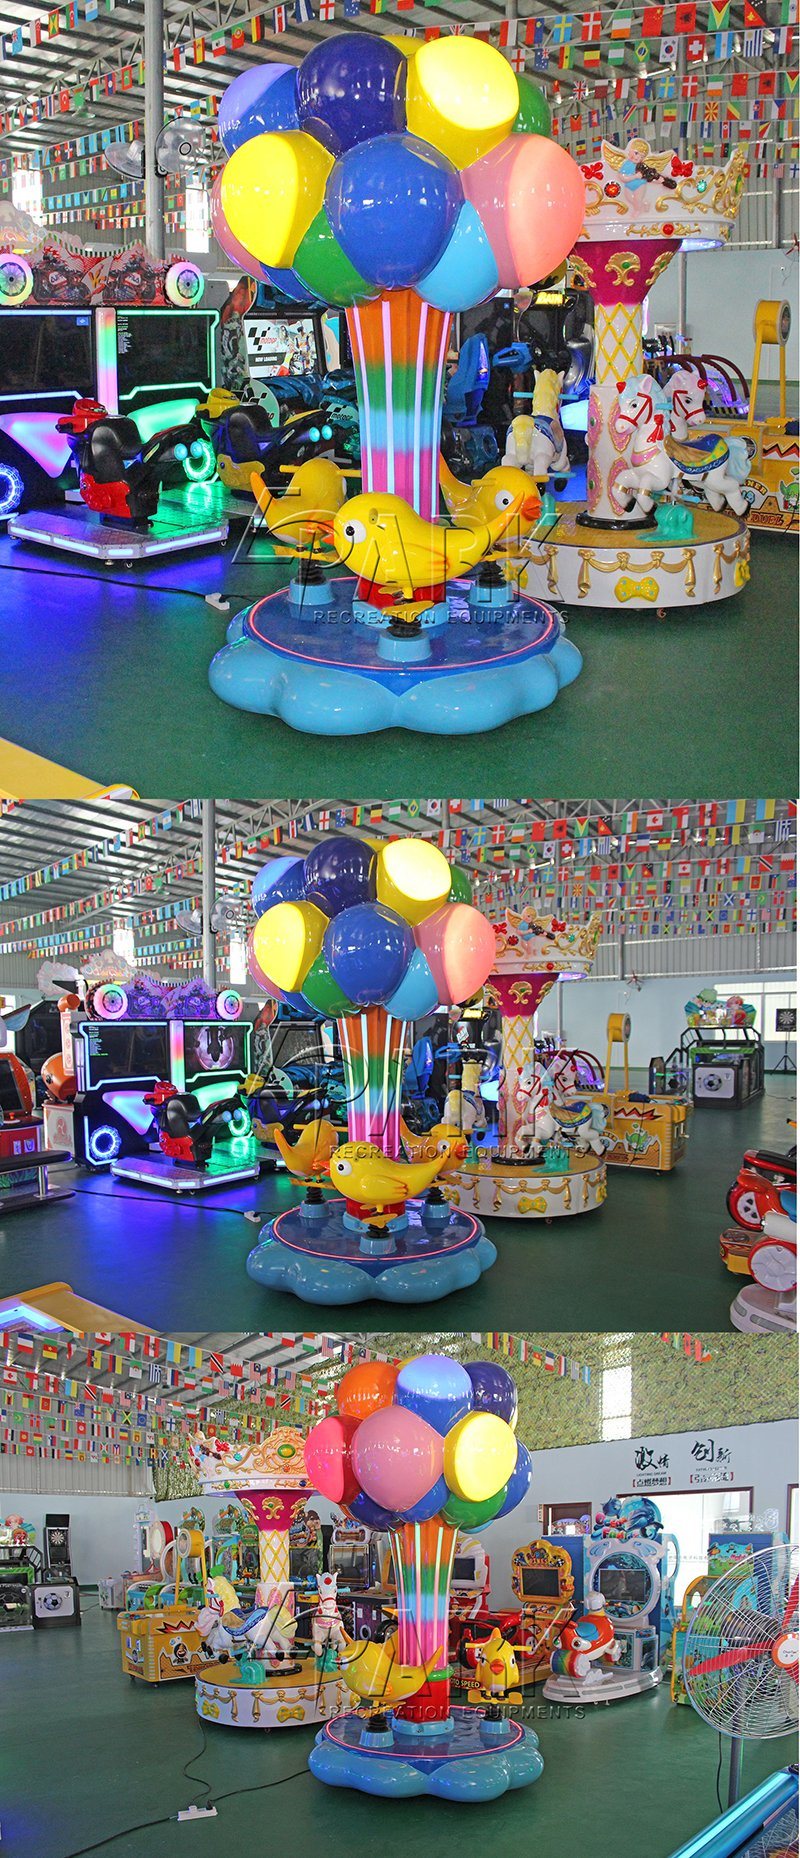 Amusement Park Colorful Bubble Kid Carousel Ride with Colorful Lighting Kids Ride Toy Machine